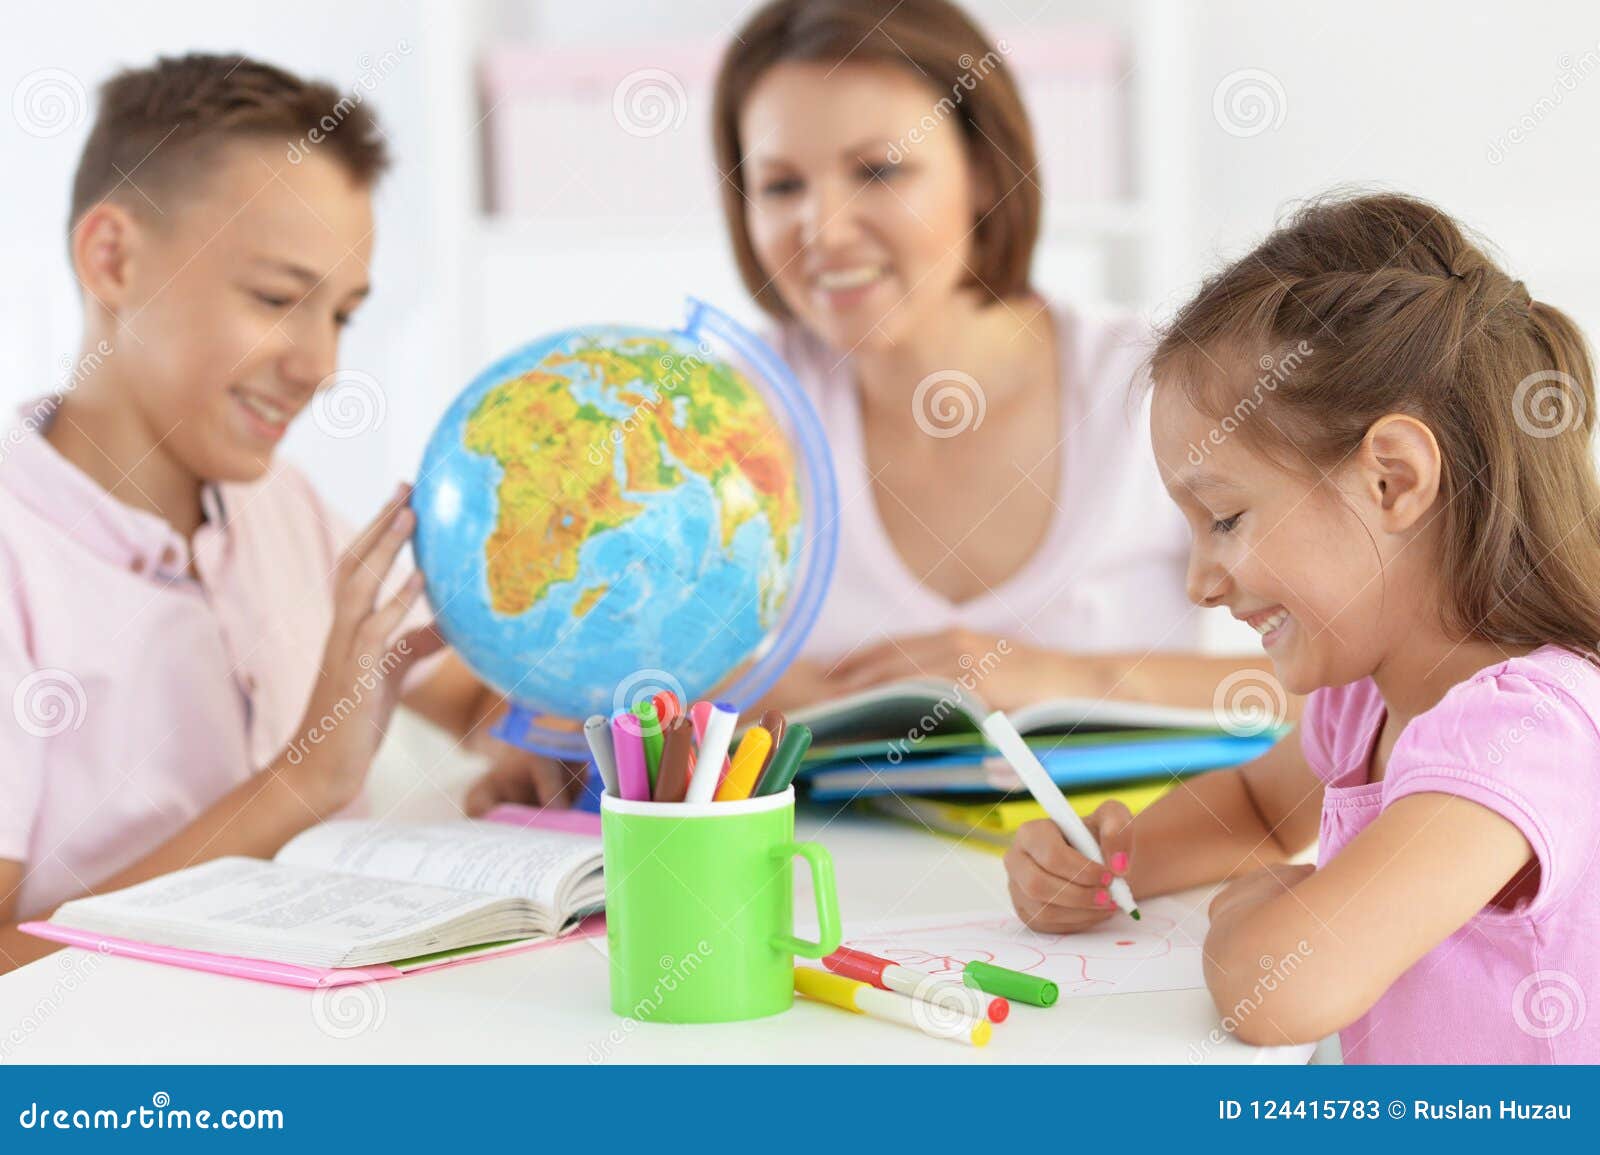 mother with children doing homework at home